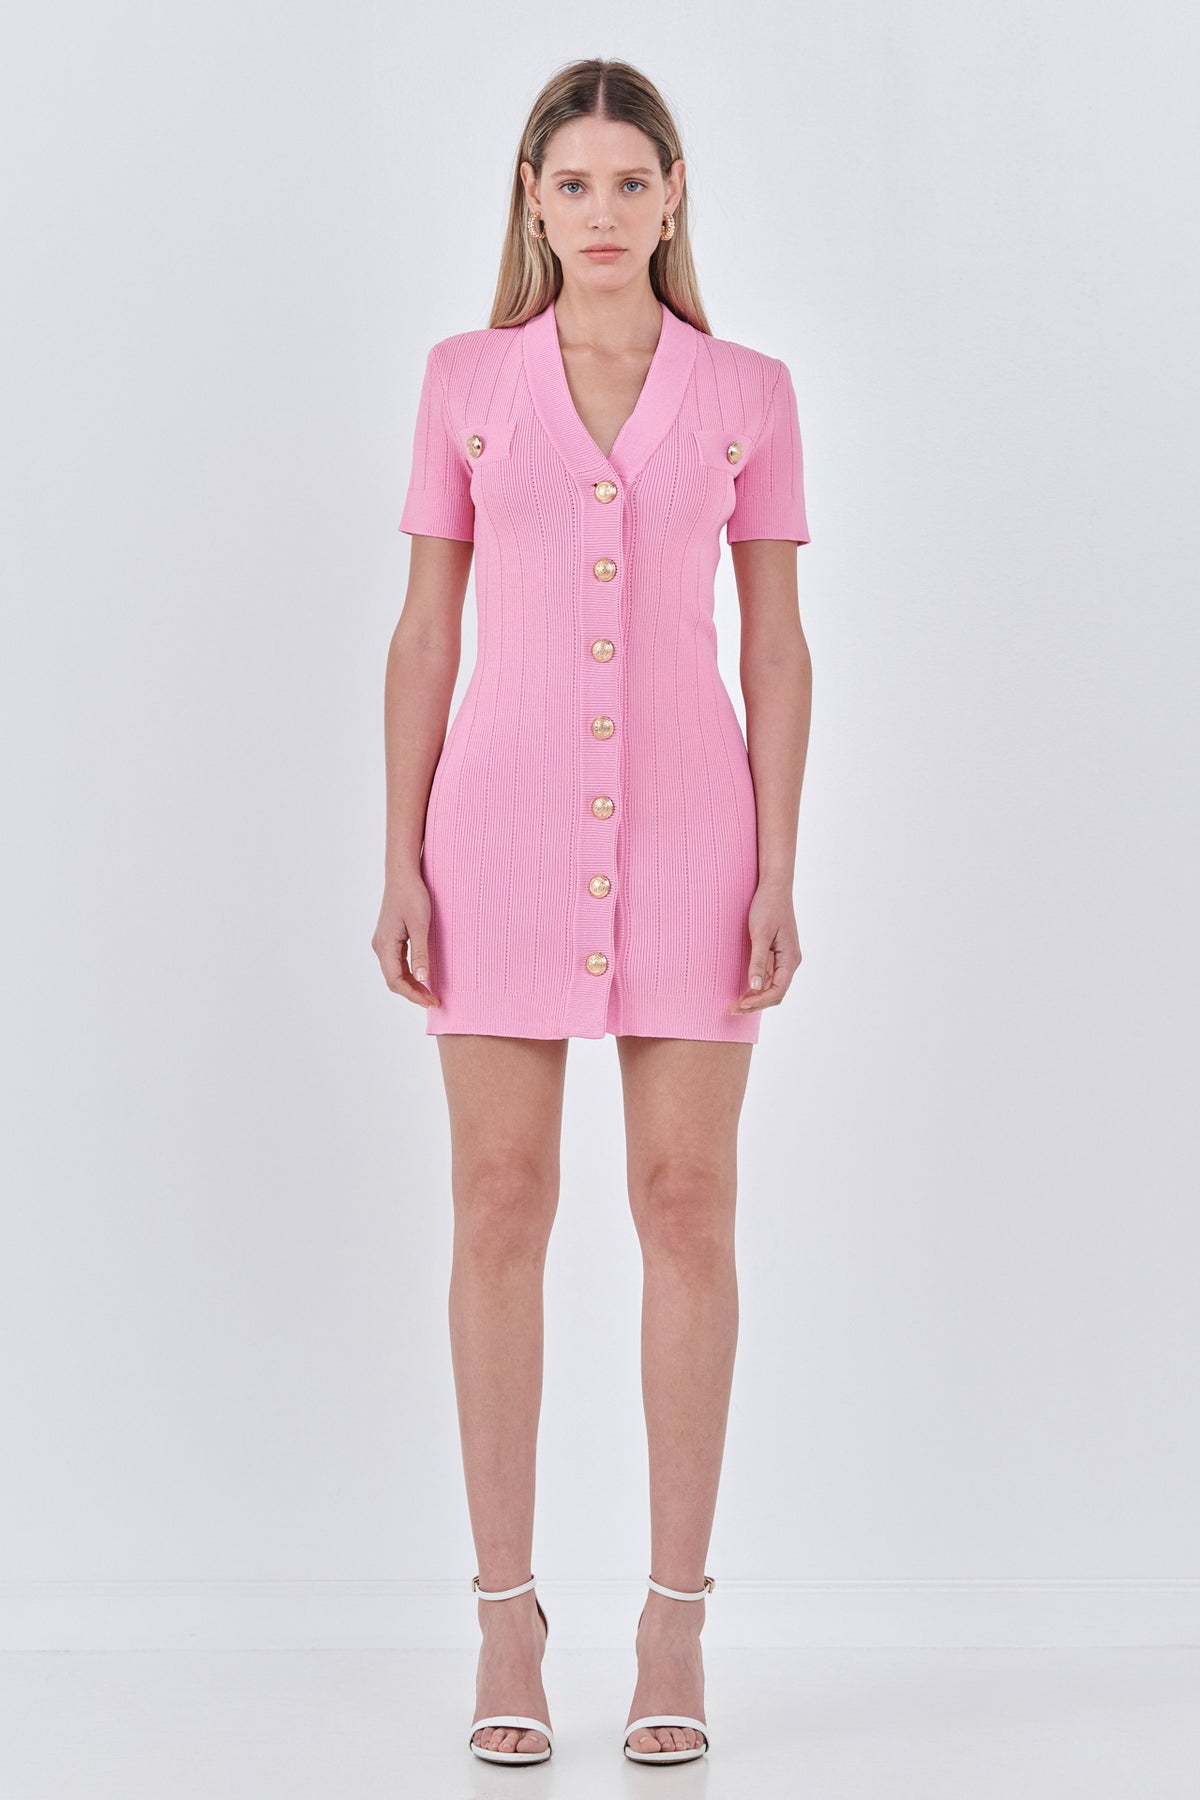 ENDLESS ROSE - Shank Button V-neckline Knit Mini Dress - DRESSES available at Objectrare